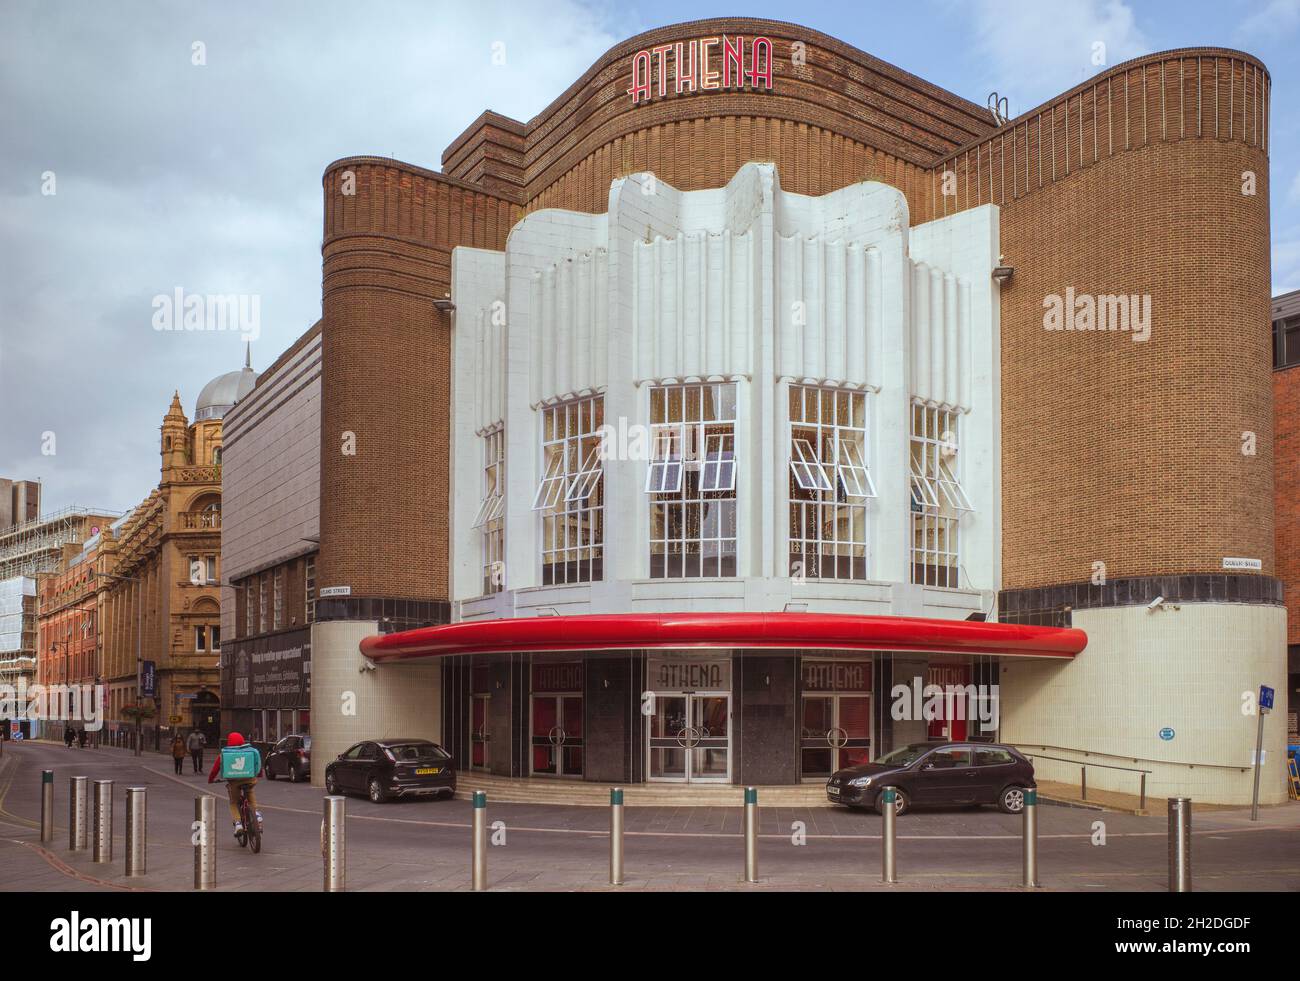 The Athena is an Art Deco style Grade II listed events venue in the cultural quarter of Leicester City Centre, England. Built originally as a cinema. Stock Photo